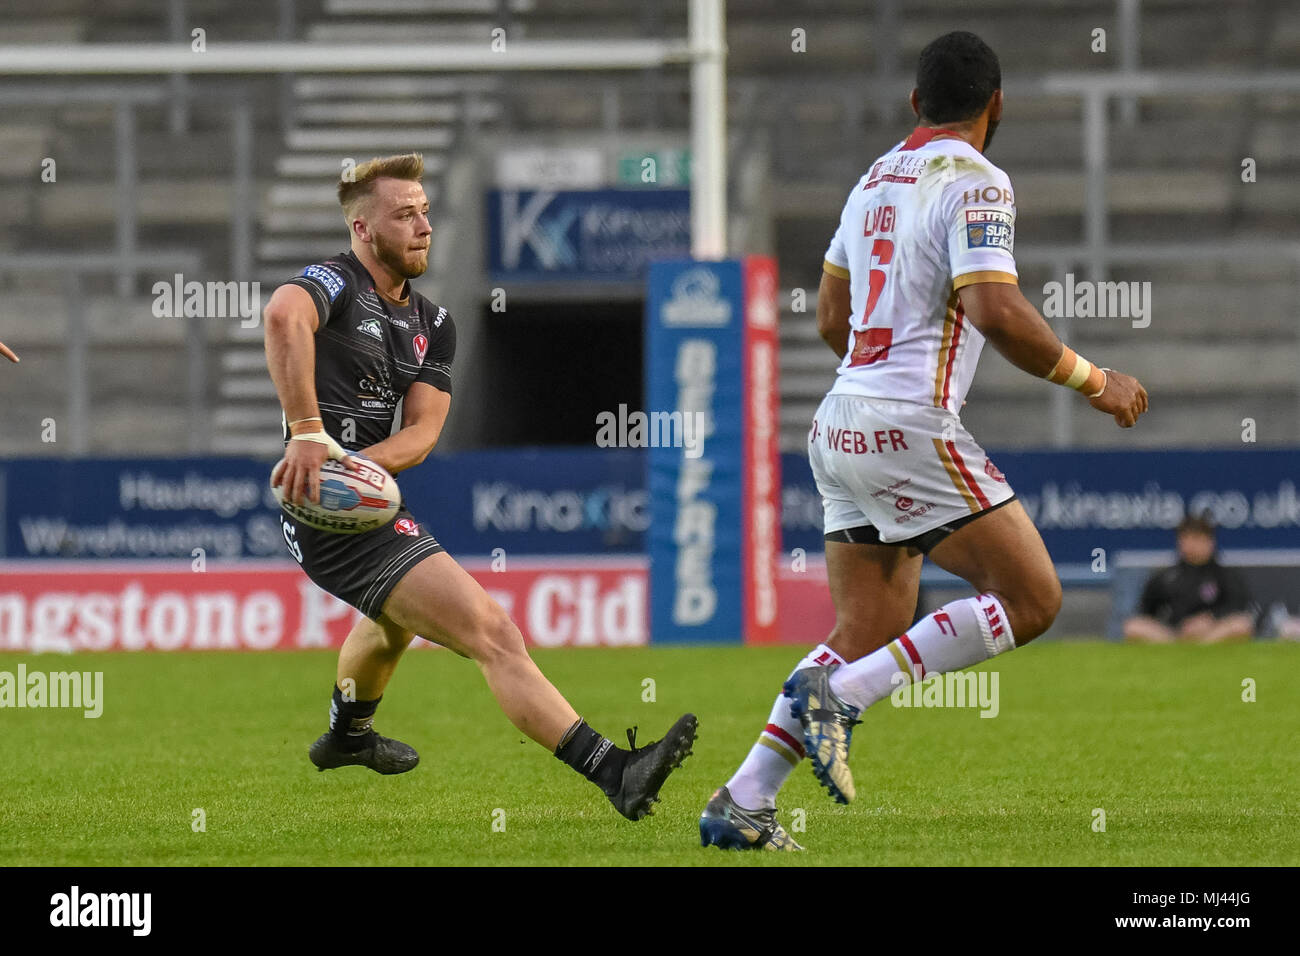 3rd May 2018, Totally Wicked Stadium, St Helens, England; Betfred Super League rugby, Round 14, St Helens v Catalans Dragons; Danny Richardson of St Helens Stock Photo